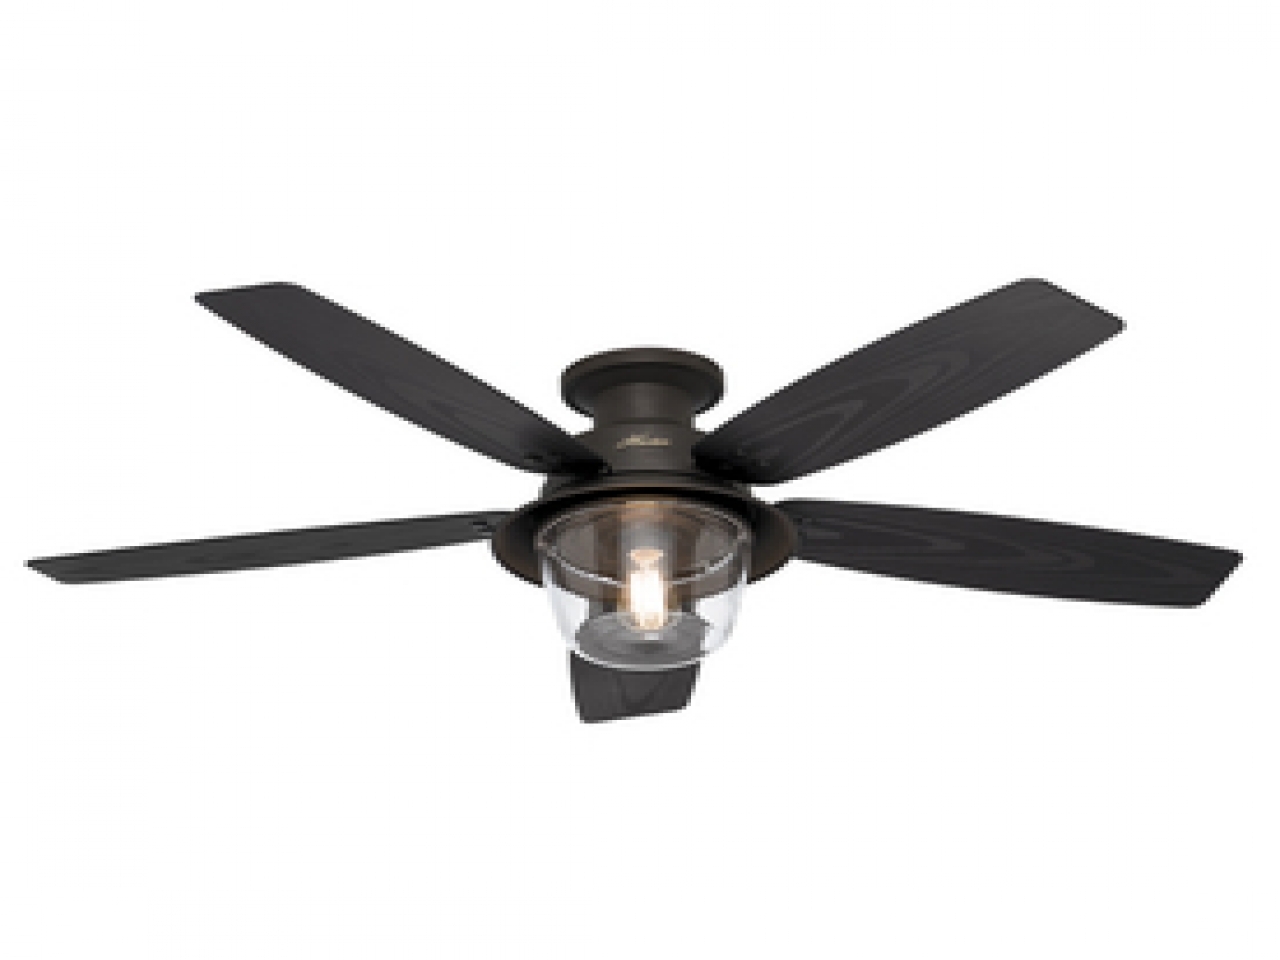 Black Outdoor Ceiling Fan With Lightceiling astounding small outdoor ceiling fan excellent small